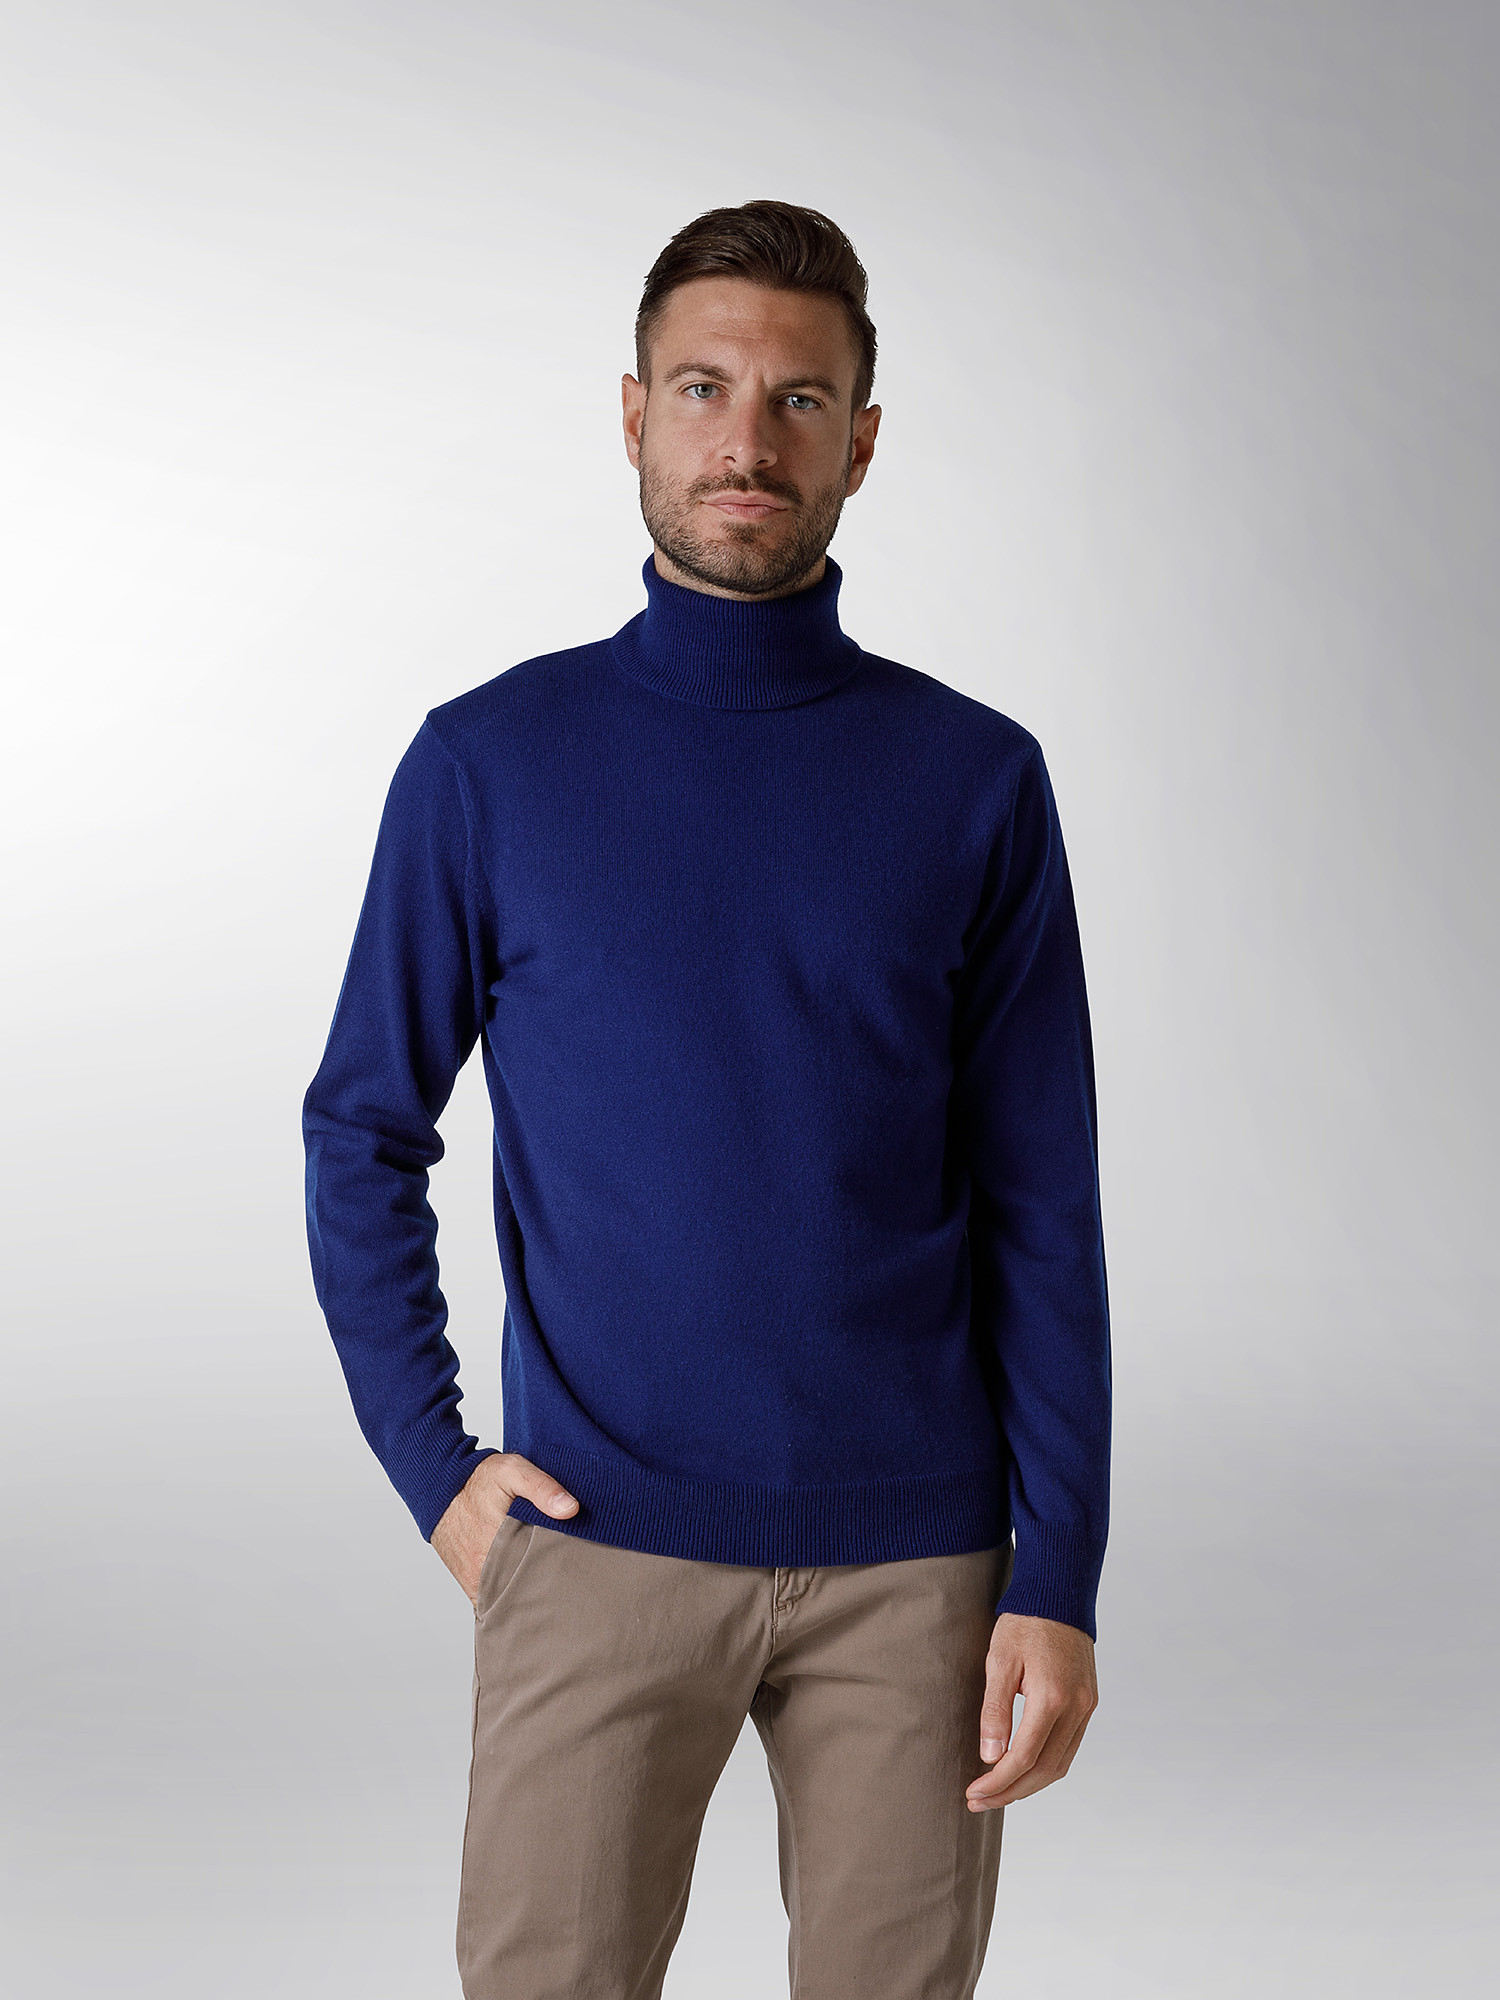 Coin Cashmere - Turtleneck in pure premium cashmere, Royal Blue, large image number 1